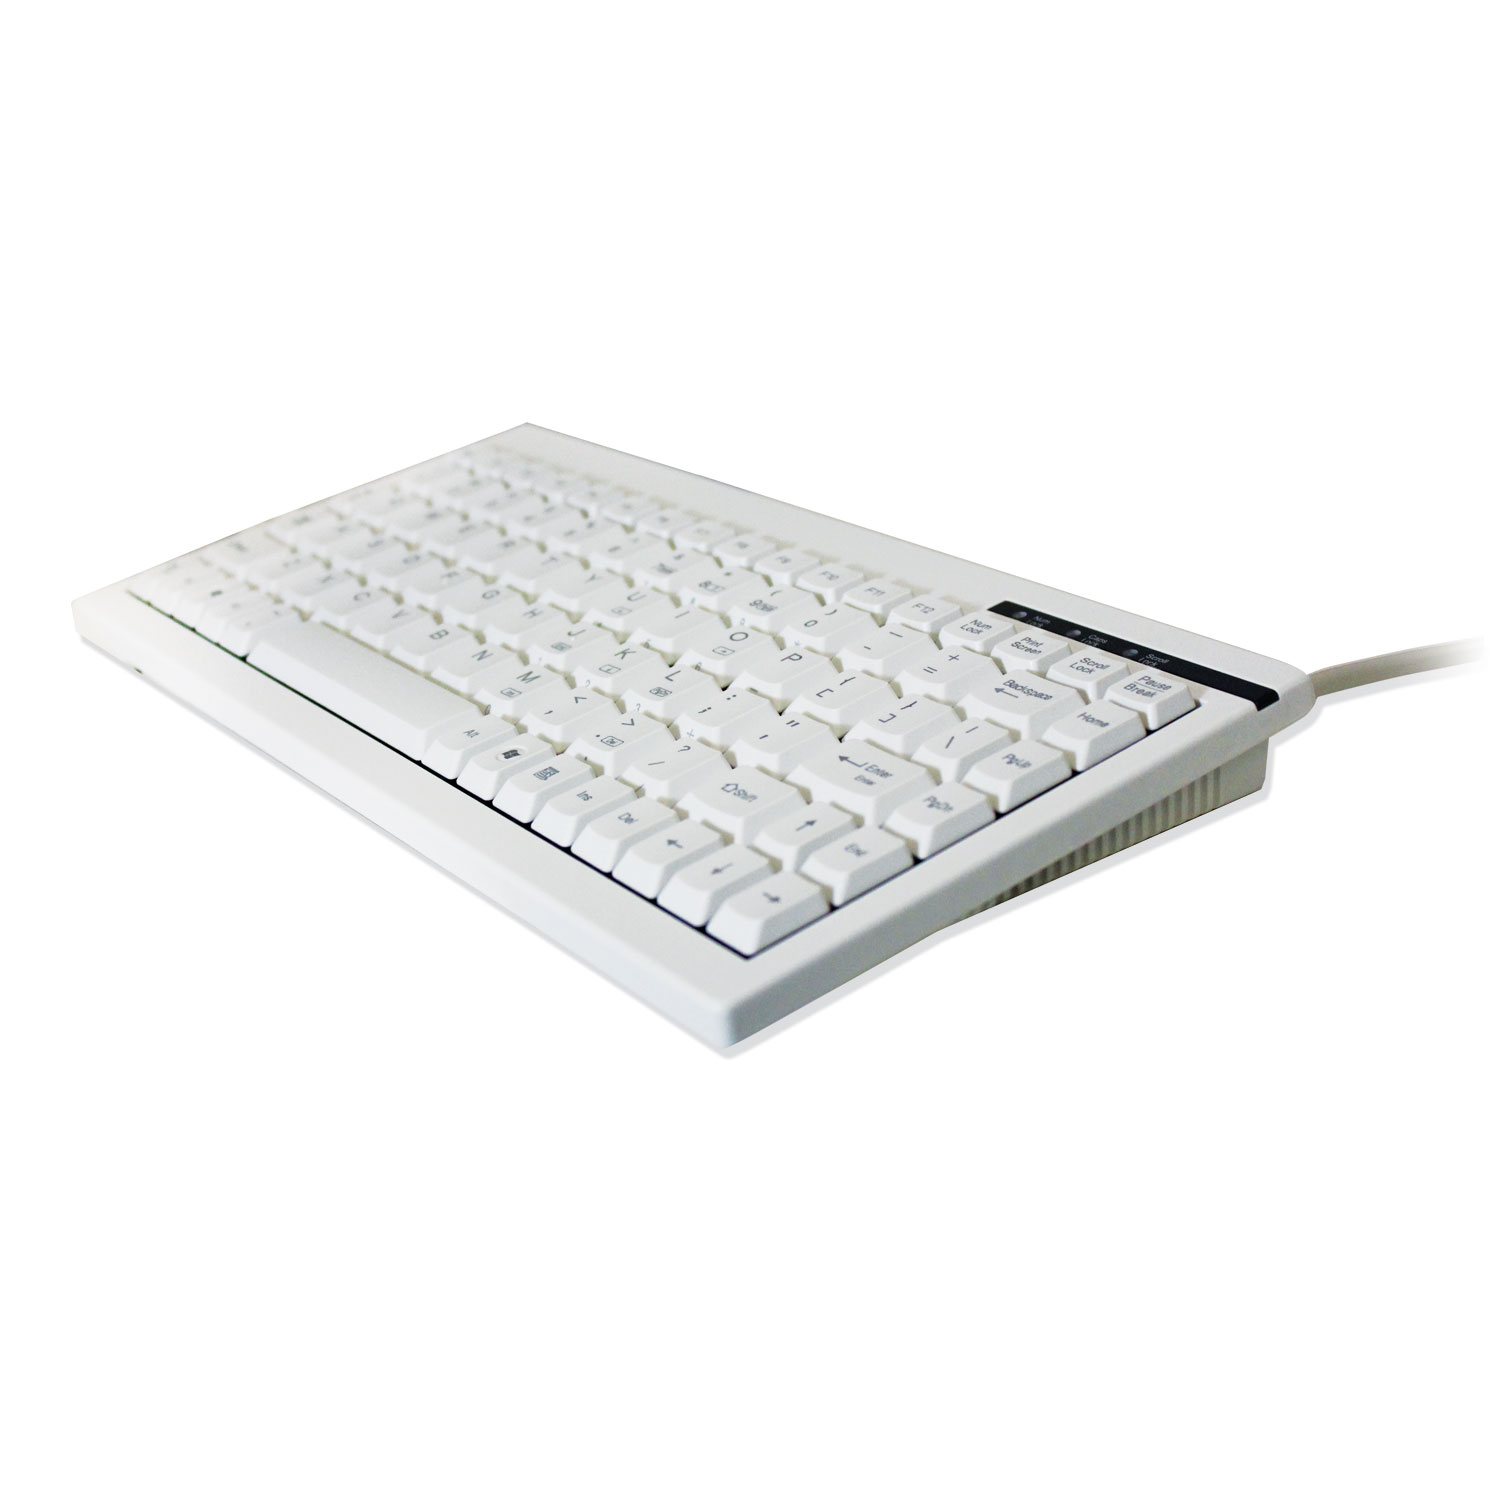 ACK-595PW - Mini Keyboard with Embedded Numeric Keypad (PS/2, White)